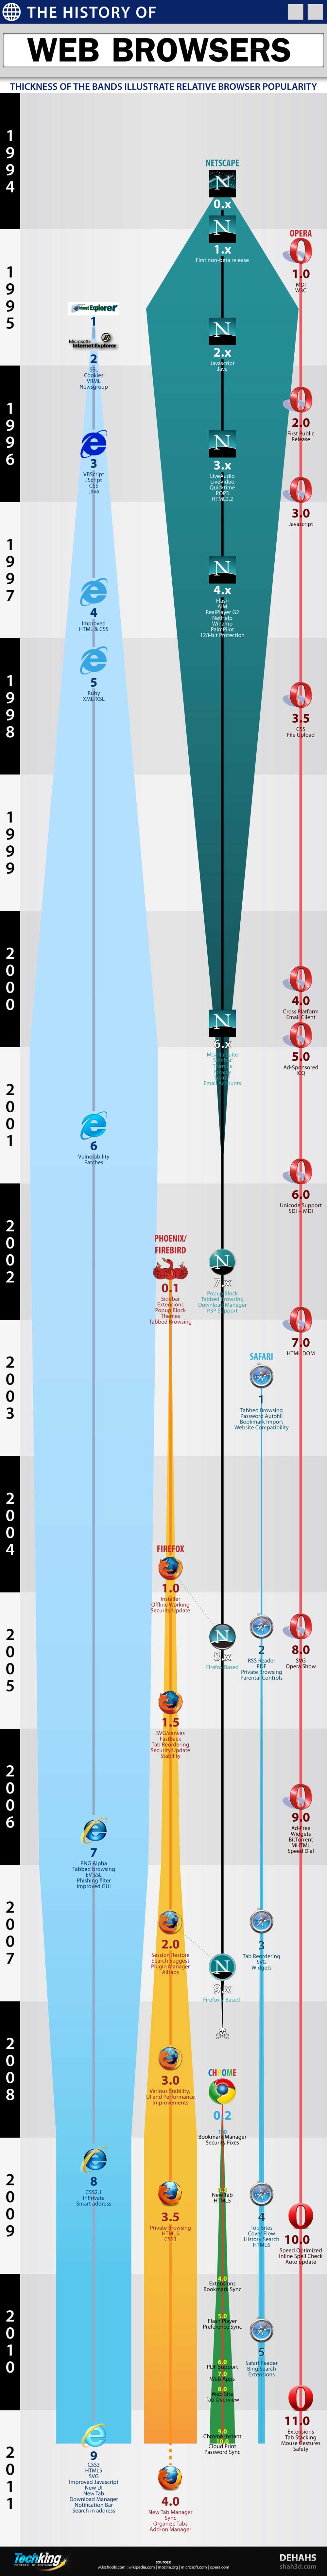 The History Of Web Browsers [Infographic]